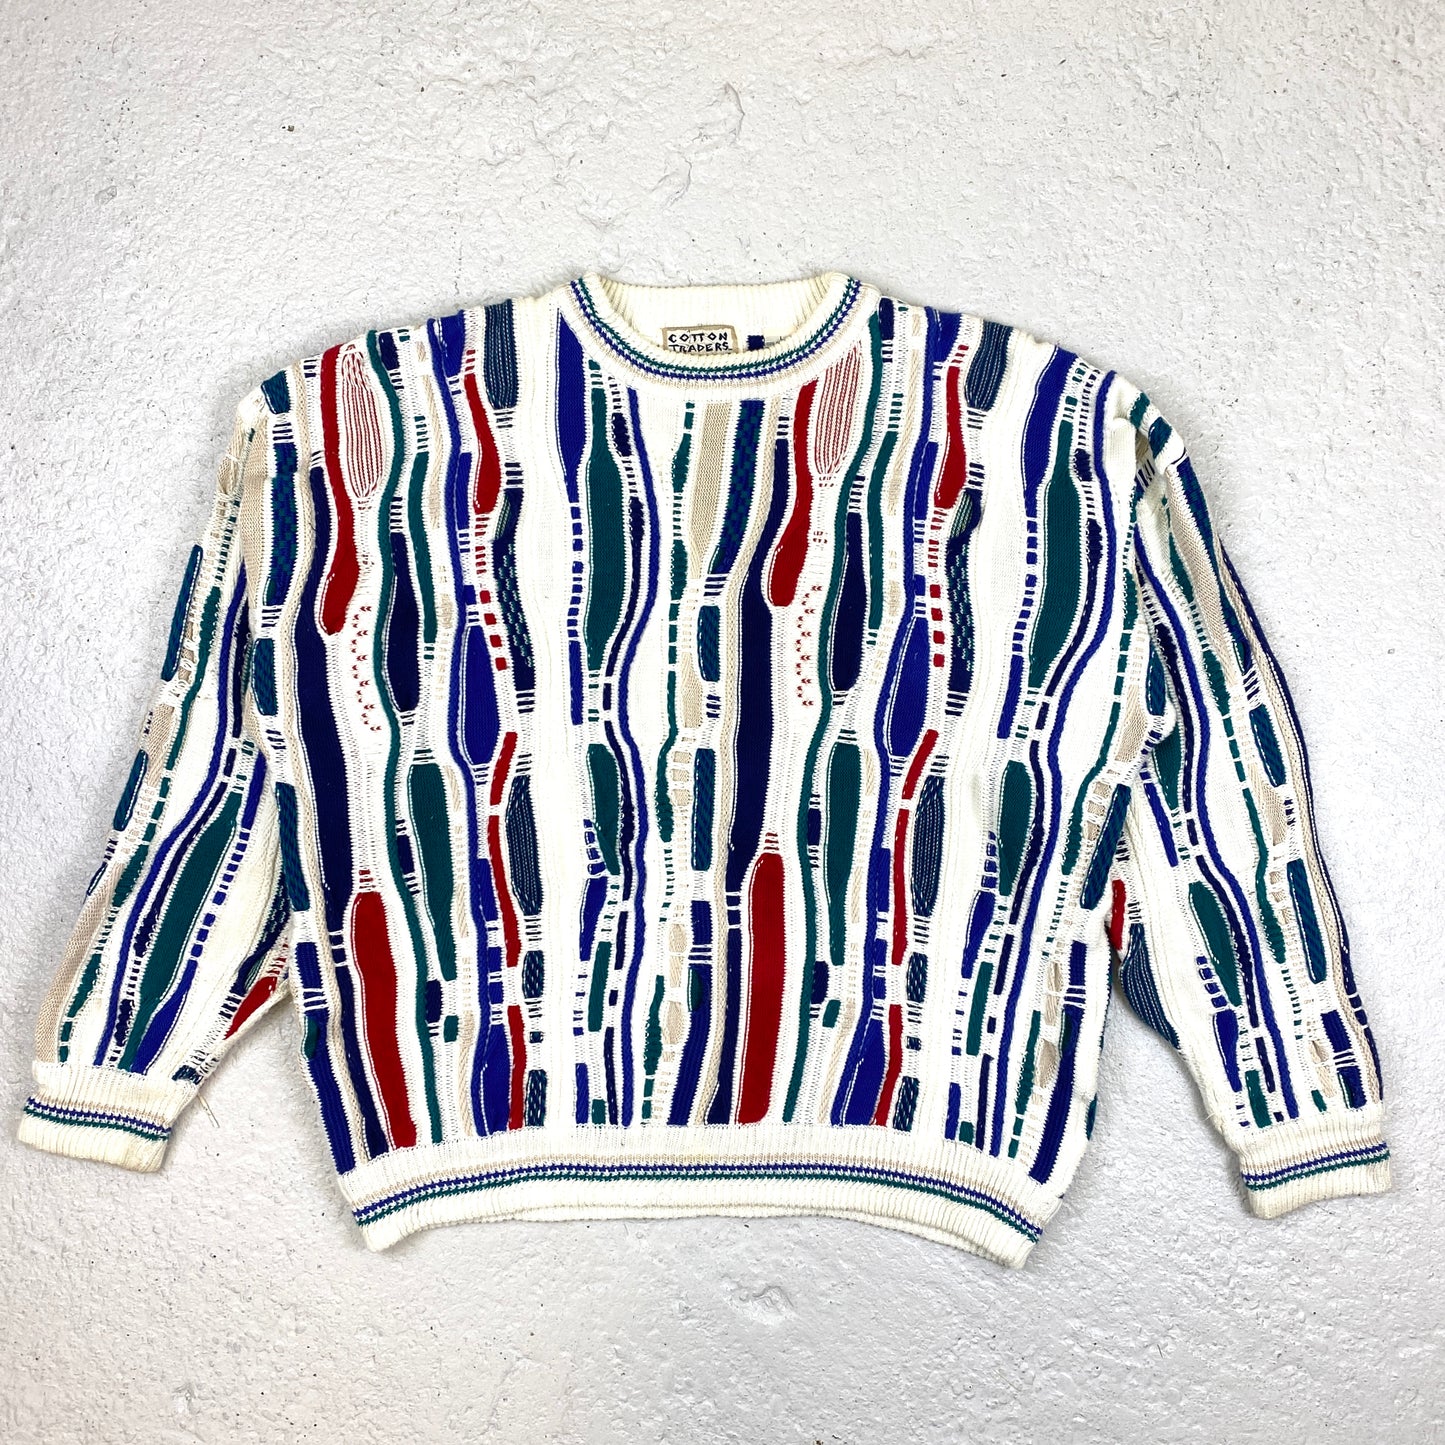 Cotton Traders RARE heavyweight knit sweater (L)